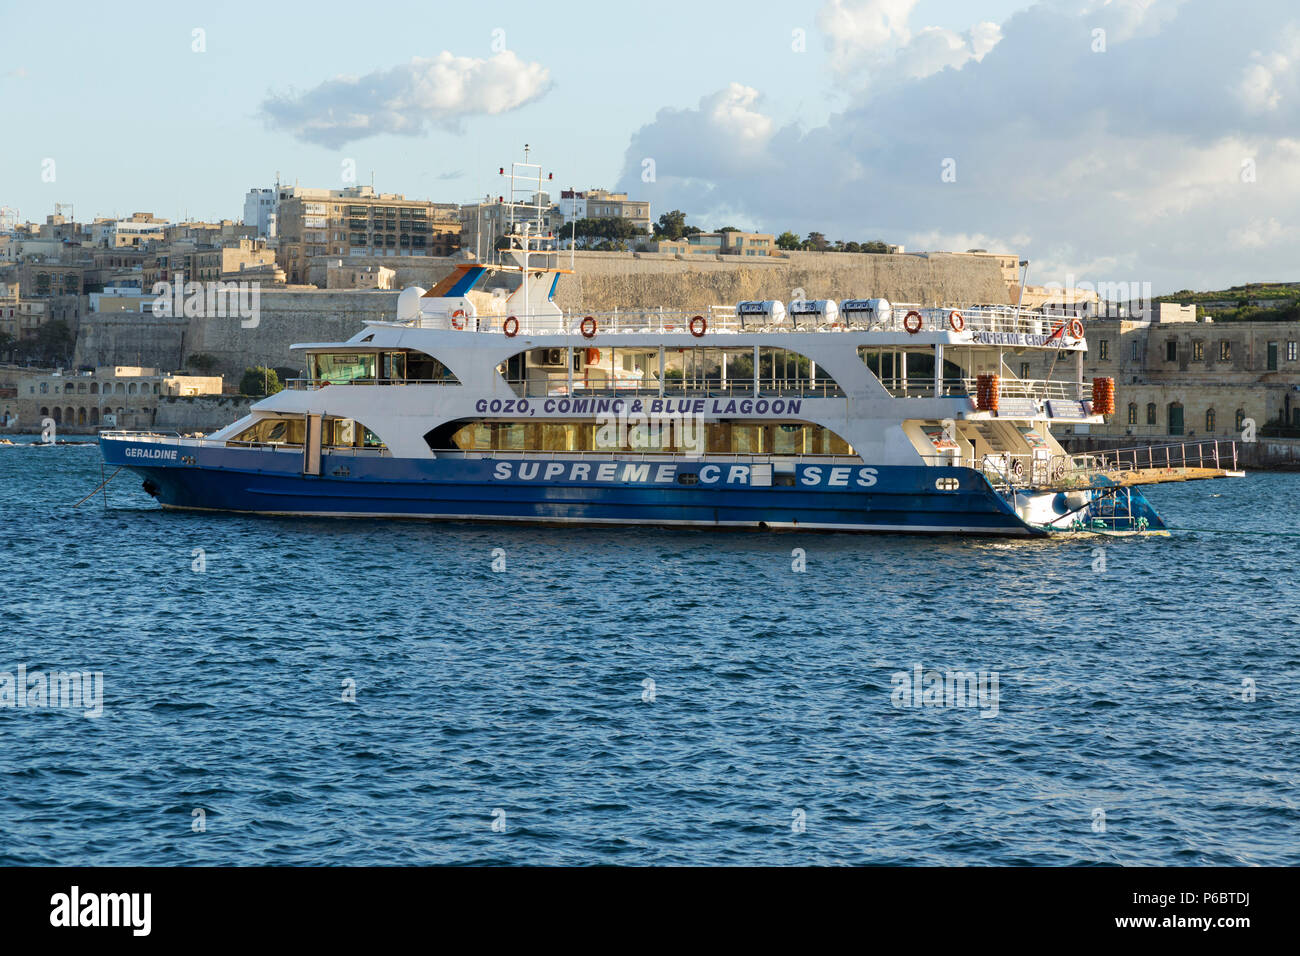 A tourist sightseeing boat ' The Geraldine ' operated by Supreme Cruises to visit Gozo, Comino, and Blue lagoon, moored in the Grand Harbour, Valletta, the island of Malta. (91) Stock Photo